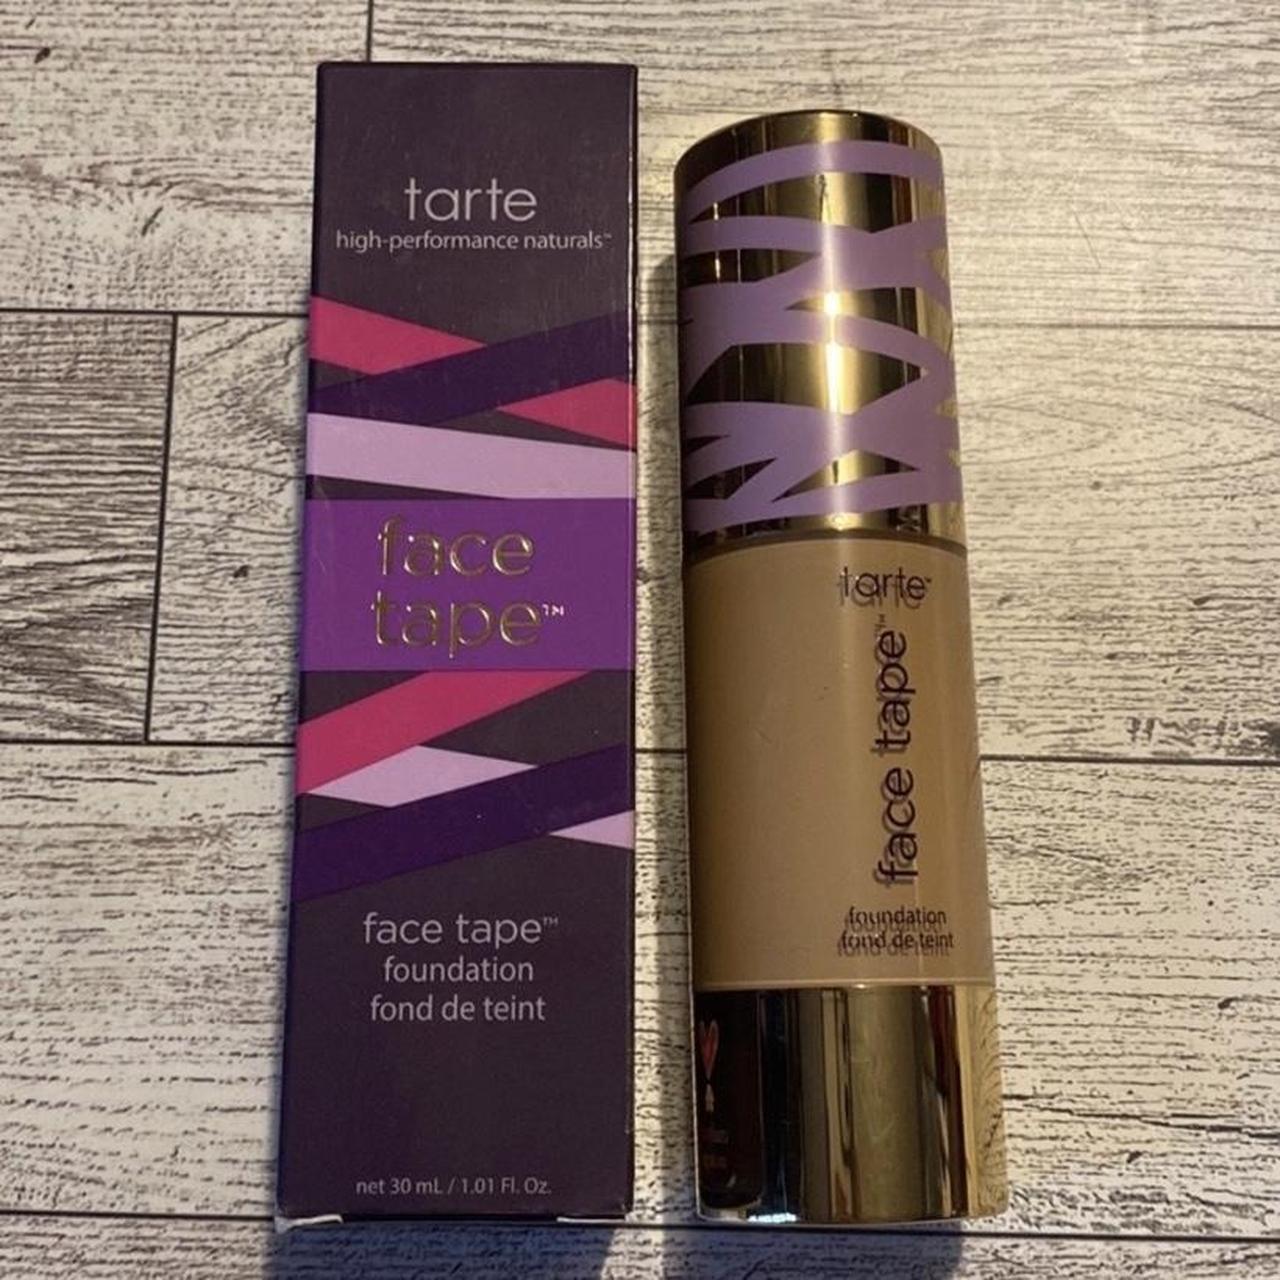 Product Image 1 - Tarte, Face Tape, High Performance